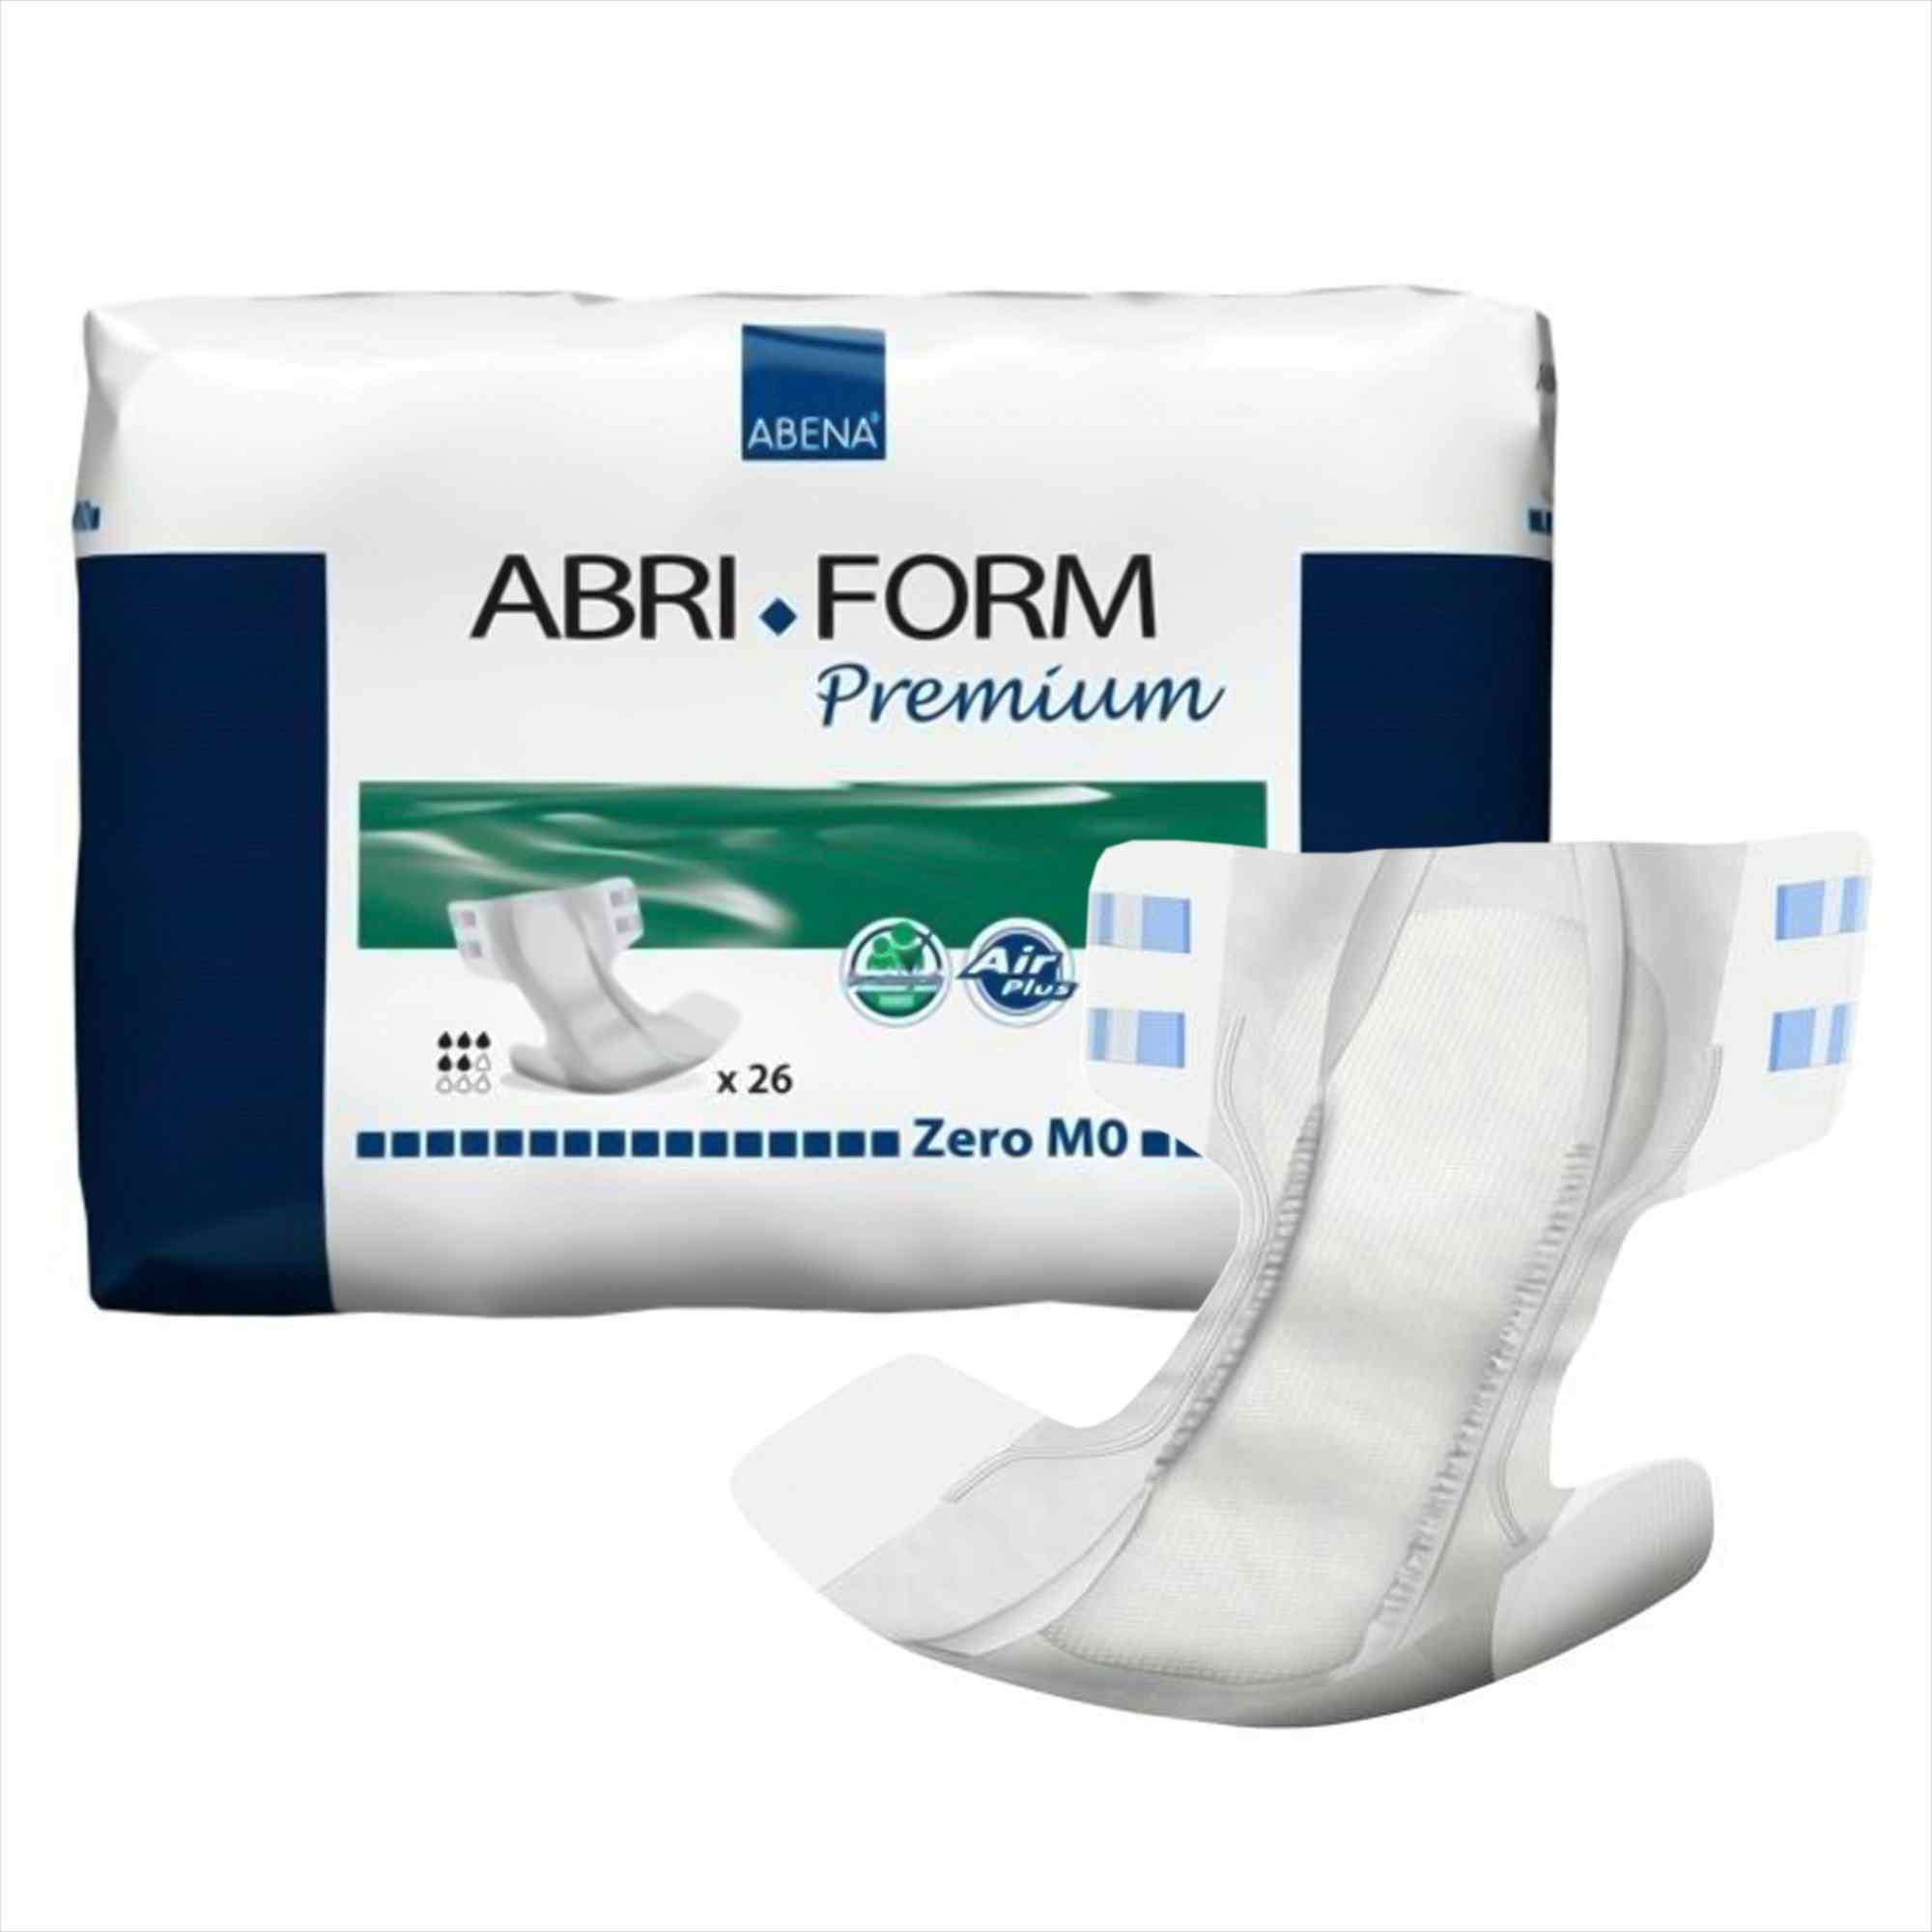 Abri-Form Premium M0 Unisex Adult Disposable Diaper with tabs, Moderate Absorbency, 43049, Medium (28-44") - Bag of 26